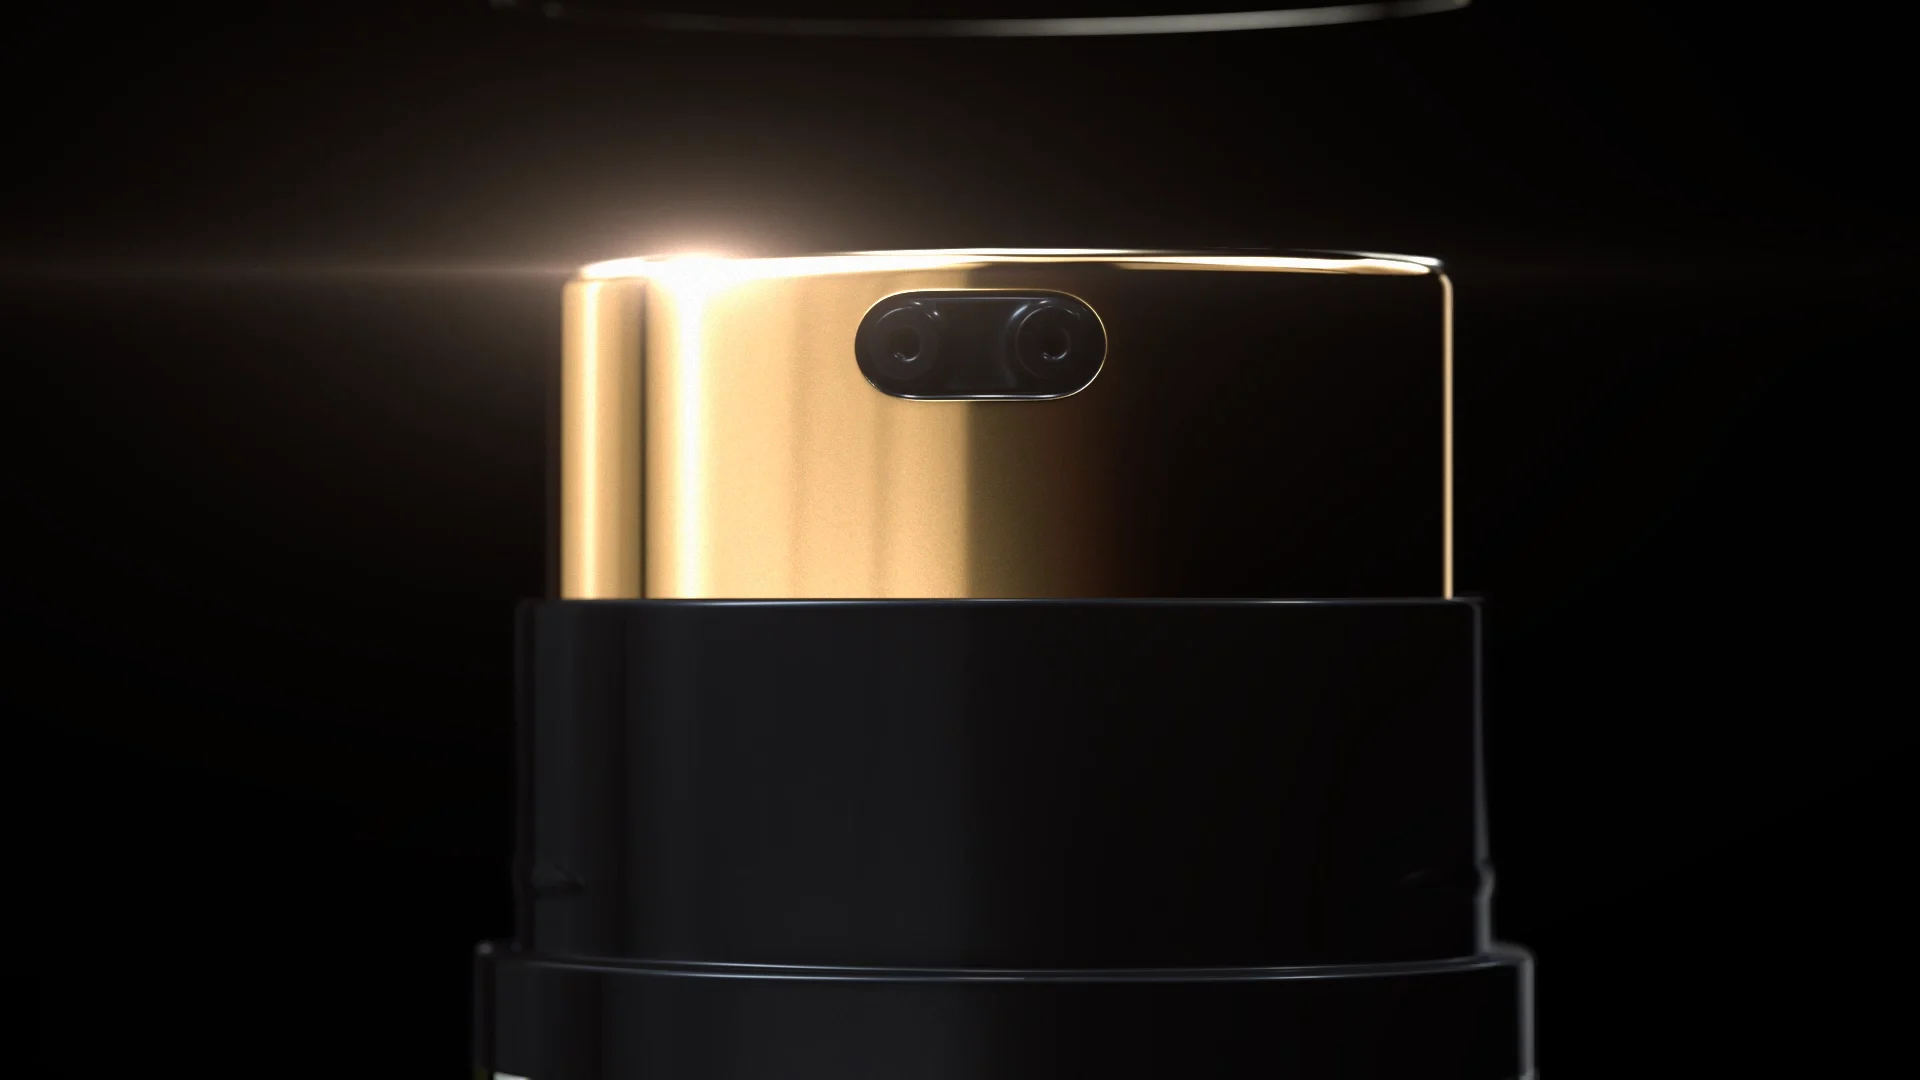 head and nozzle of a packshot bottle in front of a black background. the head of the bottle is golden and reflectes a light golden lensflare